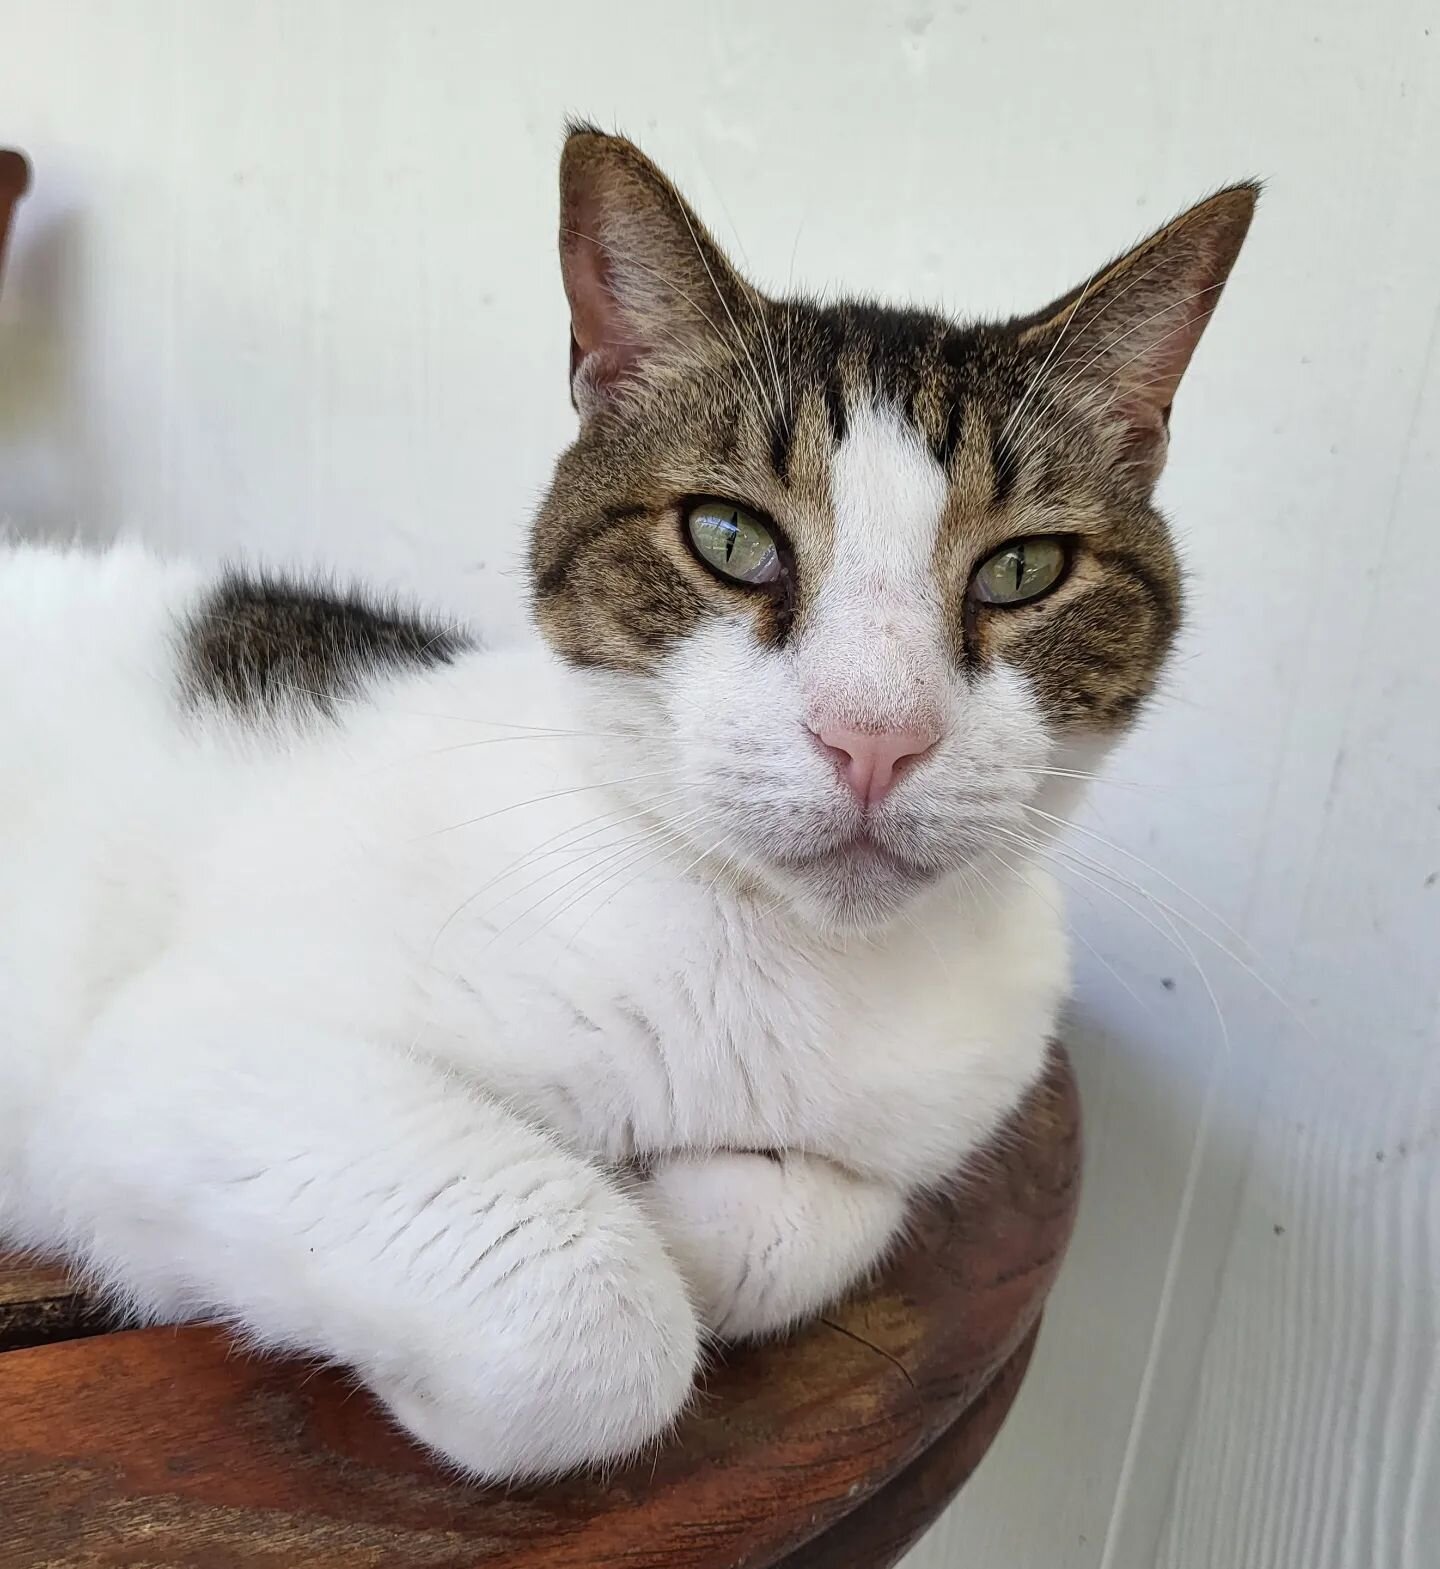 Duke is August's ORCAT of the Month! 

Duke is an older 9 year old neutered male who still acts just like a kitten. He is extremely playful and affectionate. He is always demanding your attention, in a good way! He loves being pet and loves playing w